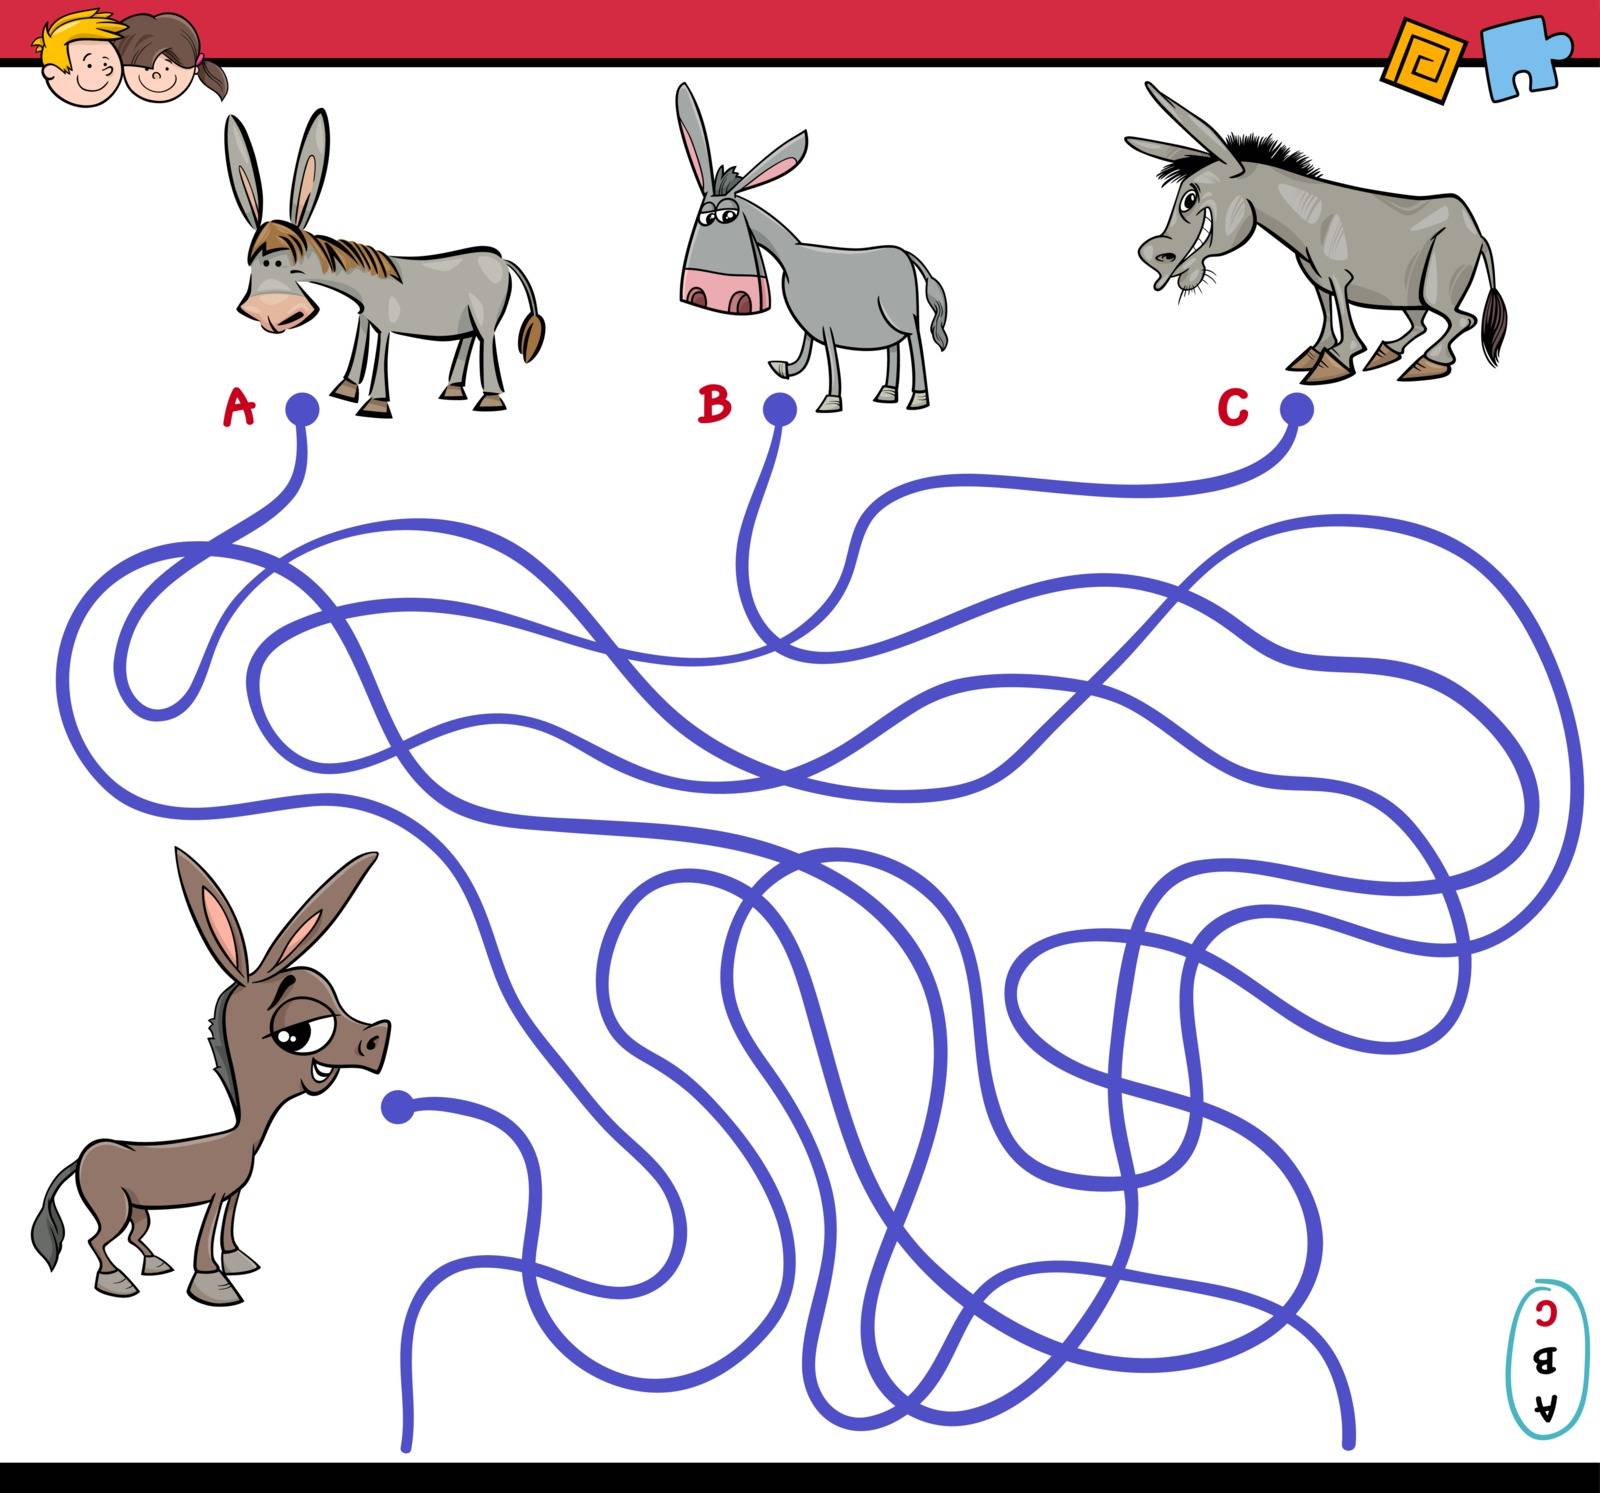 Cartoon Illustration of Paths or Maze Puzzle Activity Game with Donkey Farm Animal Characters